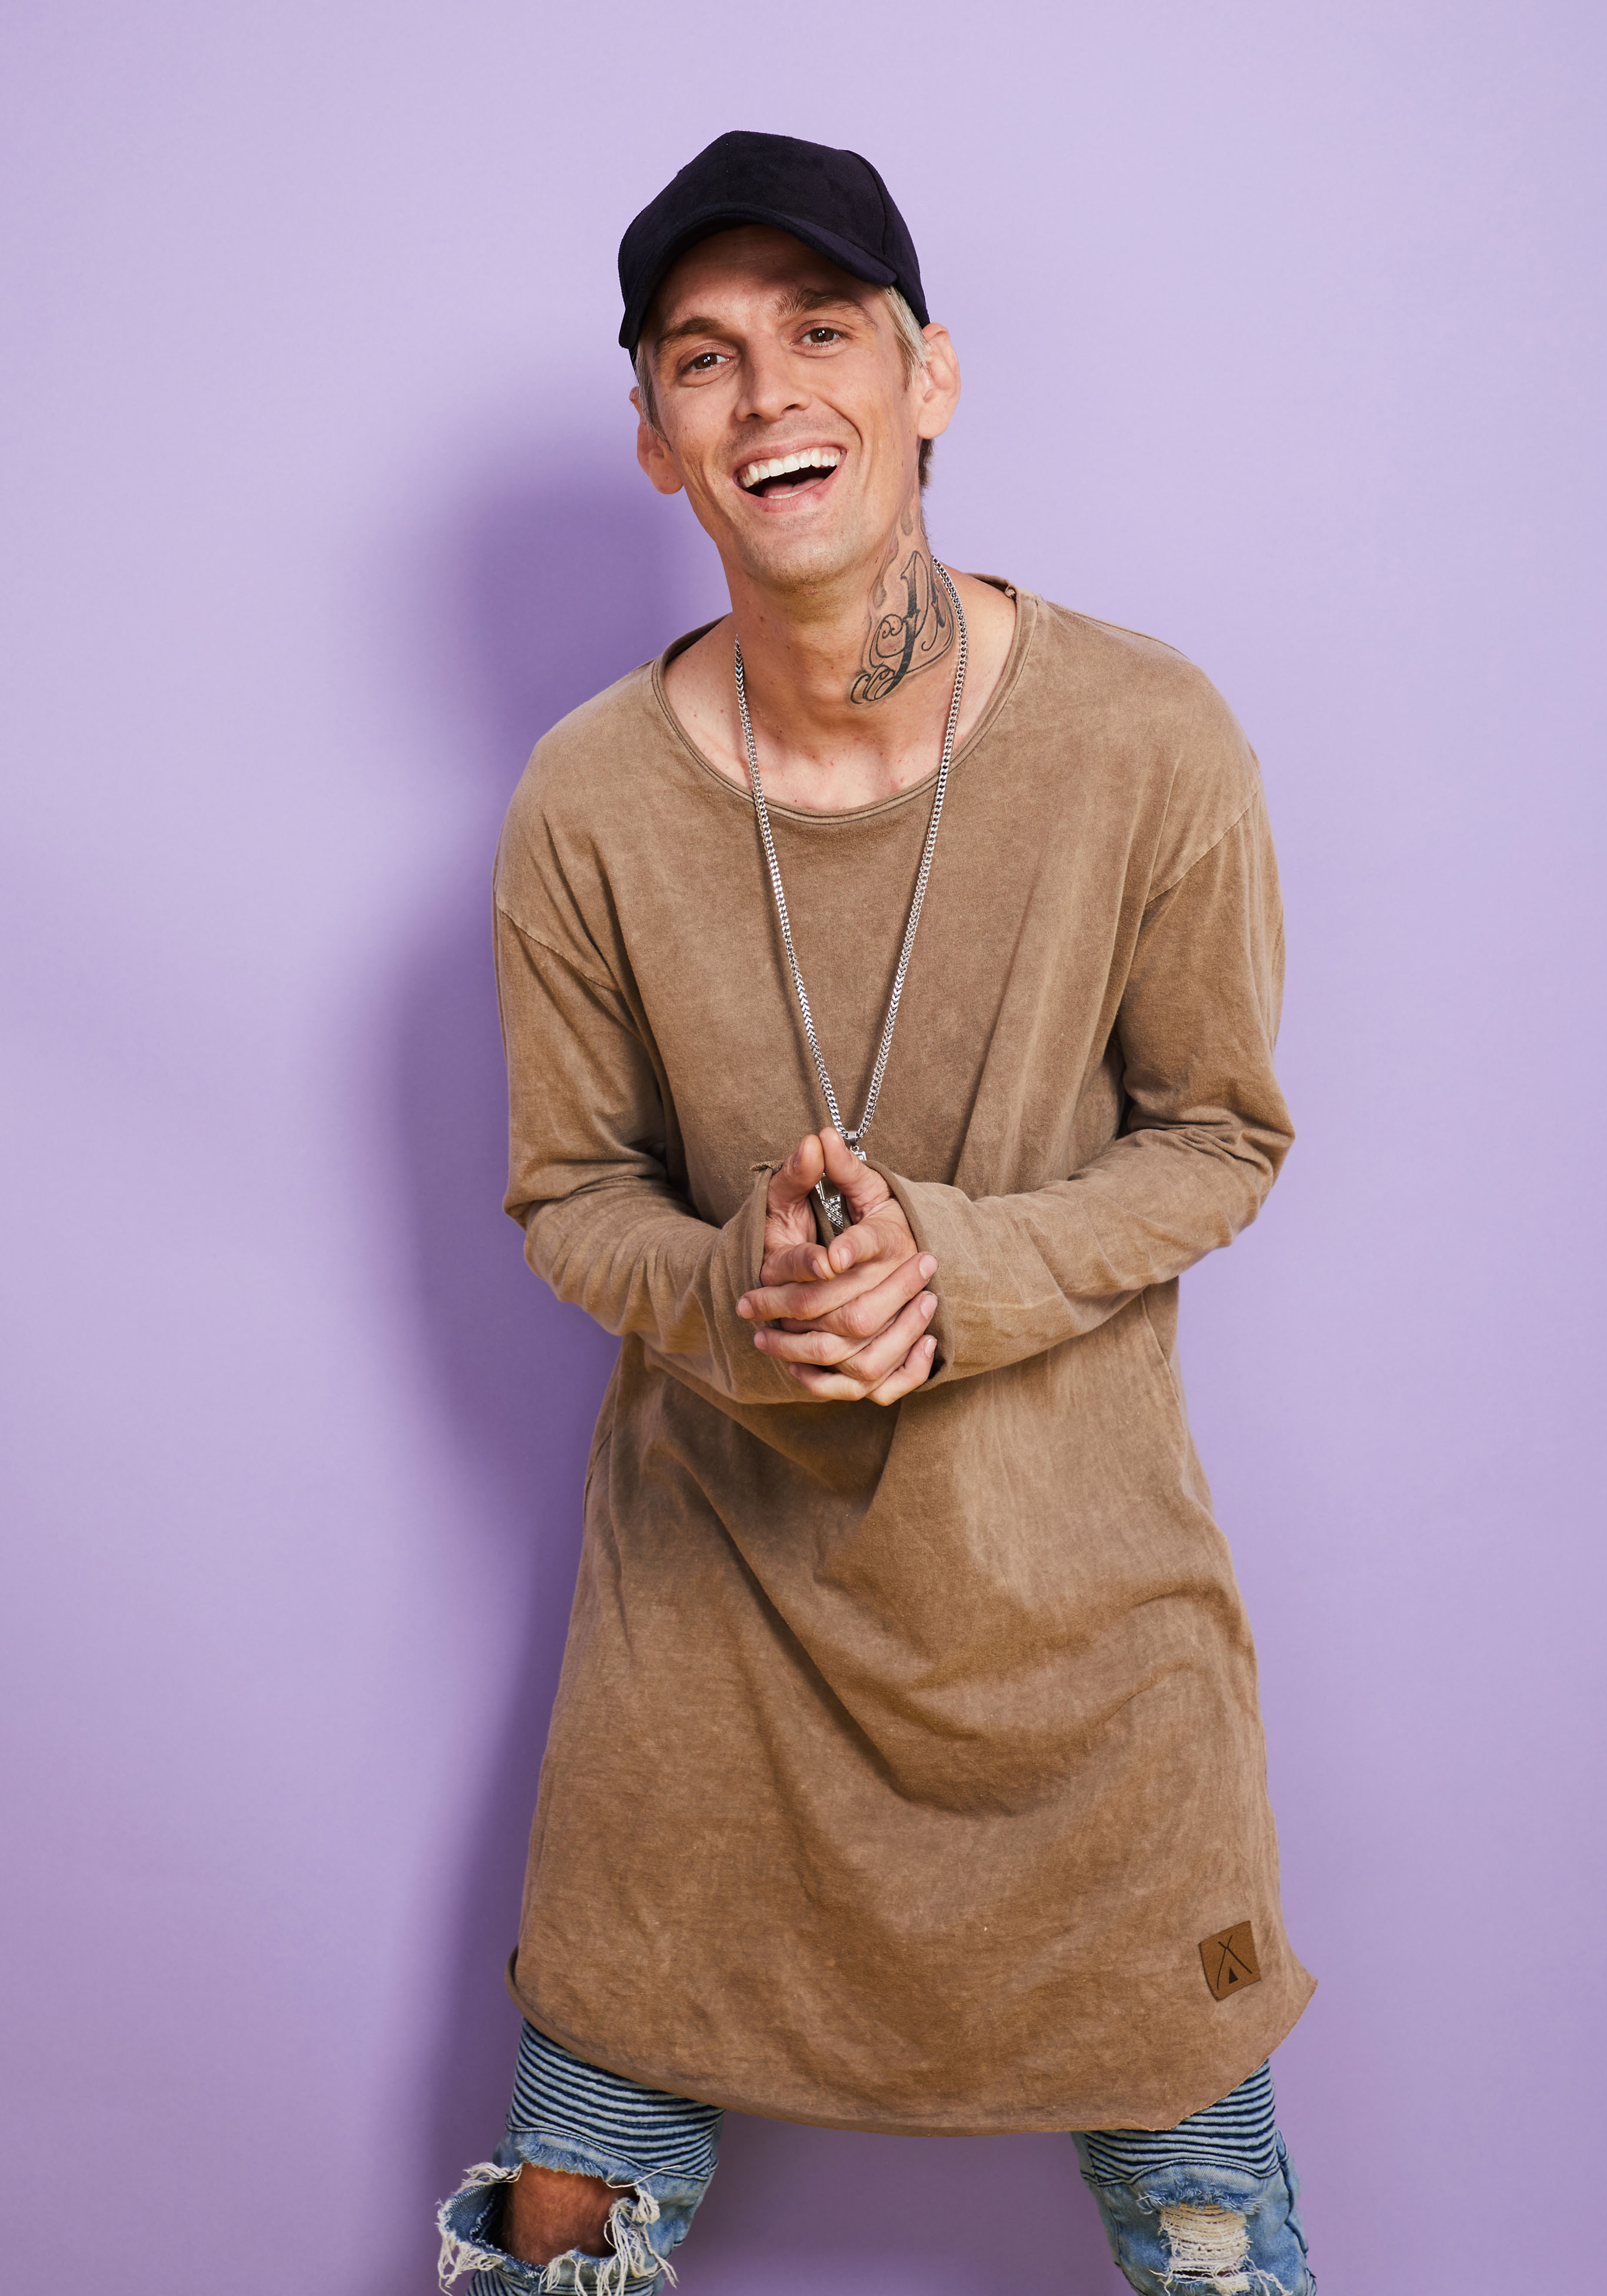 Aaron Carter Net Worth: How Much Money the Singer Had